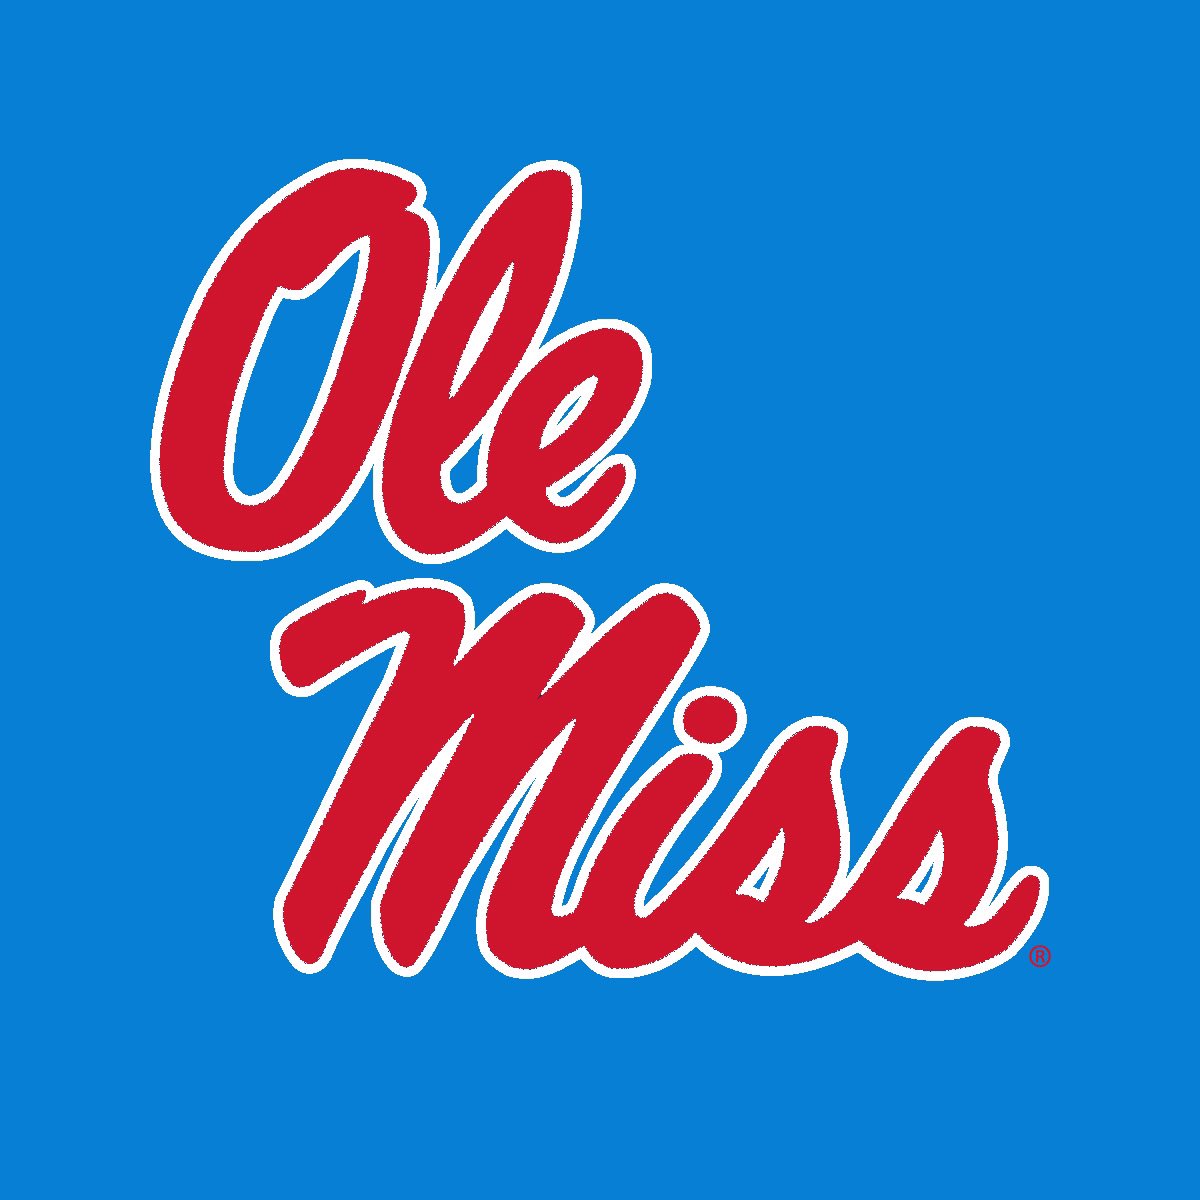 Thank you to @WeisJr_M From @OleMissFB for stopping by Folsom today. We appreciate you! #GoBullDogs @CoachTravisFHS @coach_angel3 #HottyToddy 🦈🔵🔴 @Collins_OleMiss @coachsclater